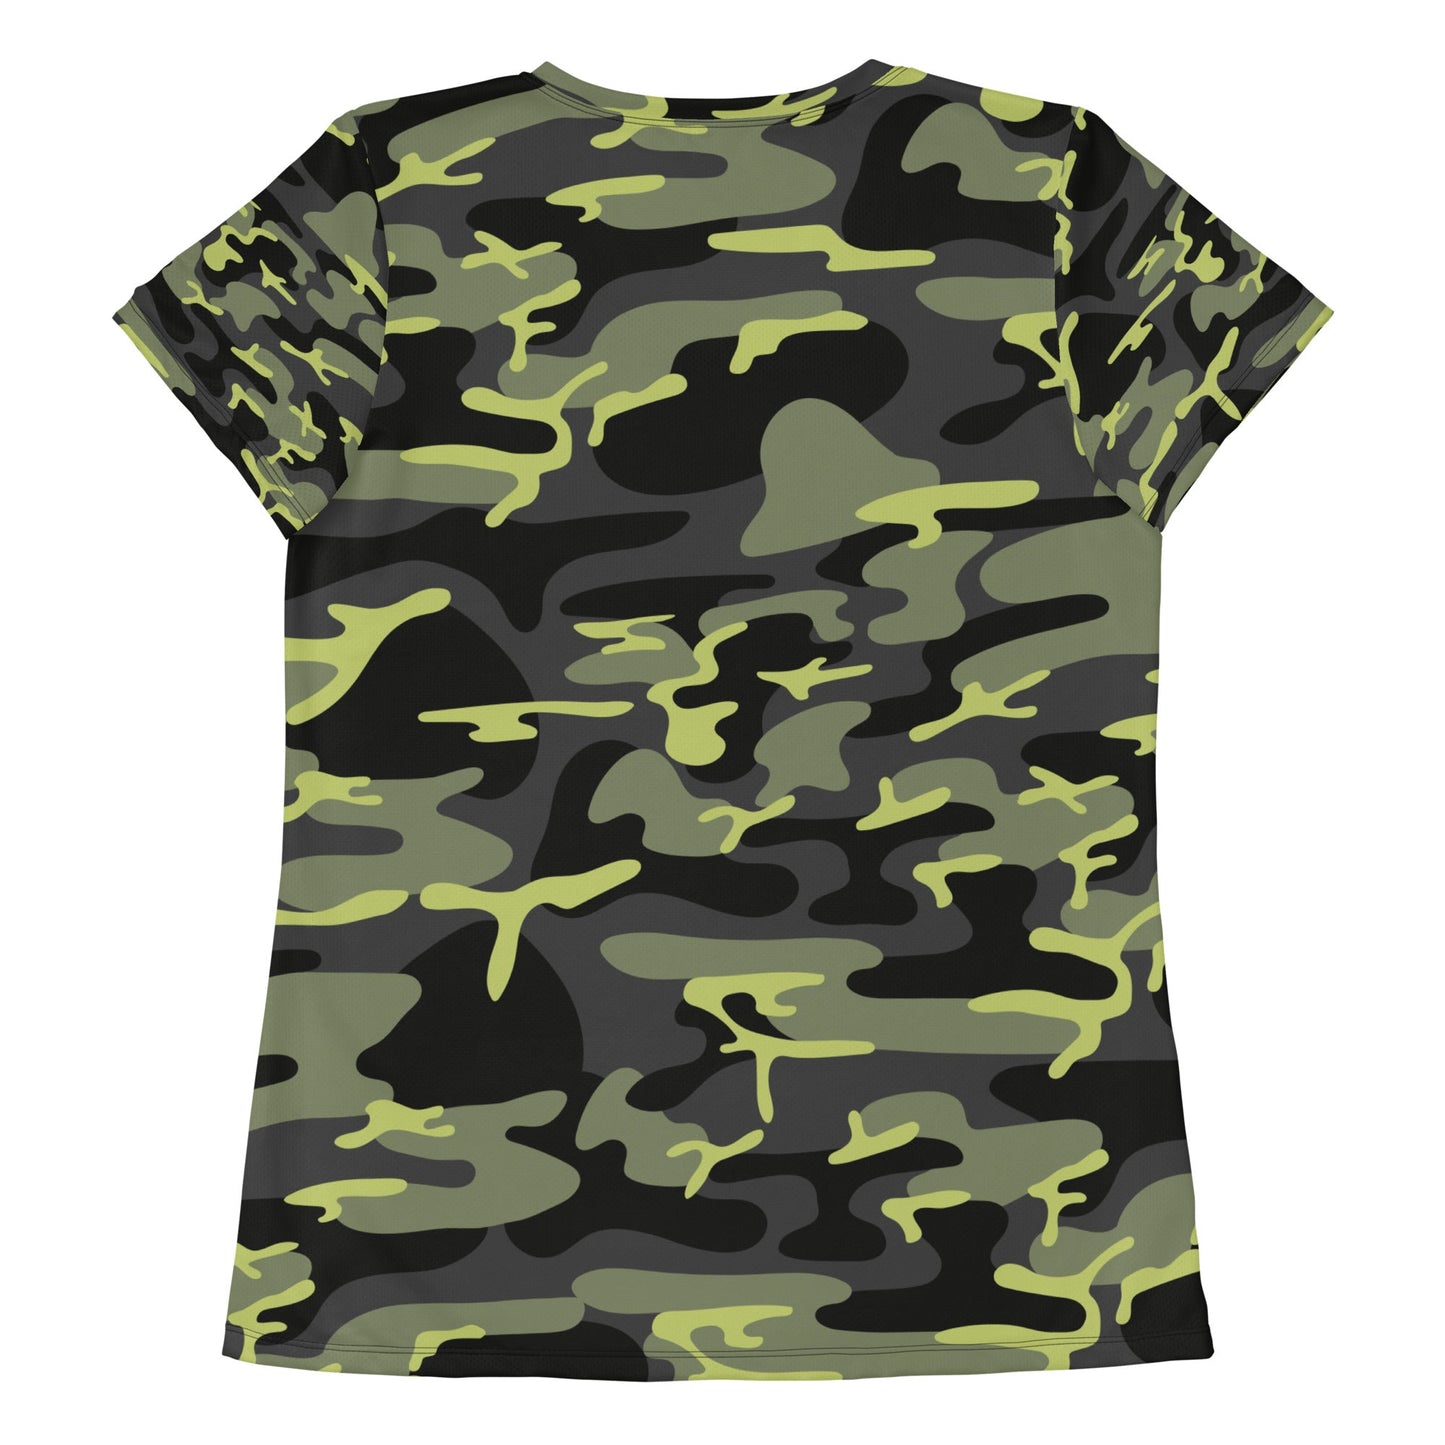 T-Shirt Sport - Femme - Collection Hommage Army - Kathrine S. - Le Traileur Anonyme